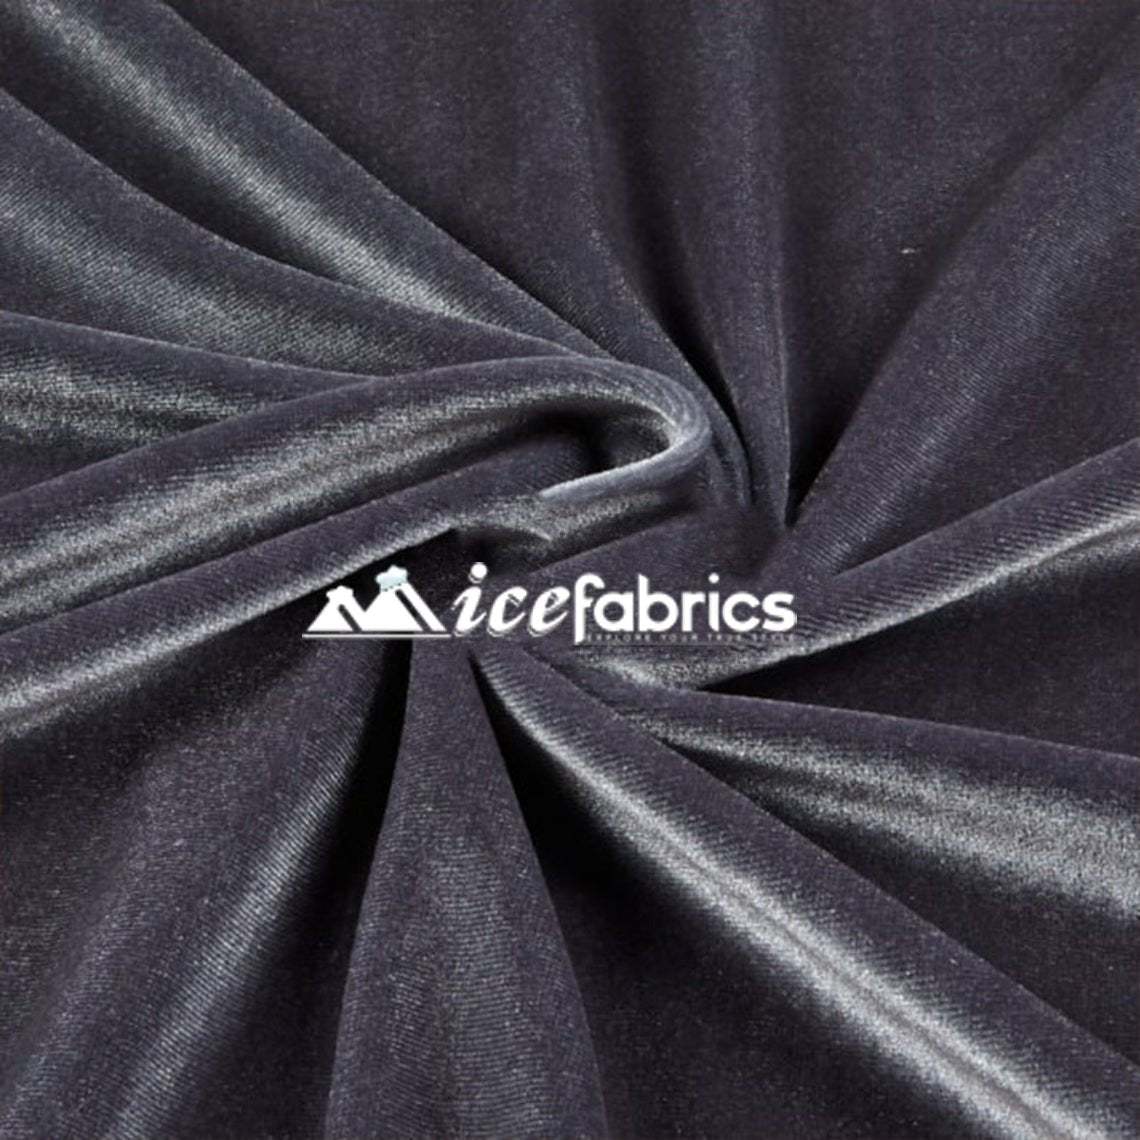 Hight Quality Stretch Velvet Fabric By The Roll (20 yards) Wholesale FabricVelvet FabricICE FABRICSICE FABRICSCharcoalBy The Roll (60" Wide)Hight Quality Stretch Velvet Fabric By The Roll (20 yards) Wholesale Fabric ICE FABRICS Charcoal